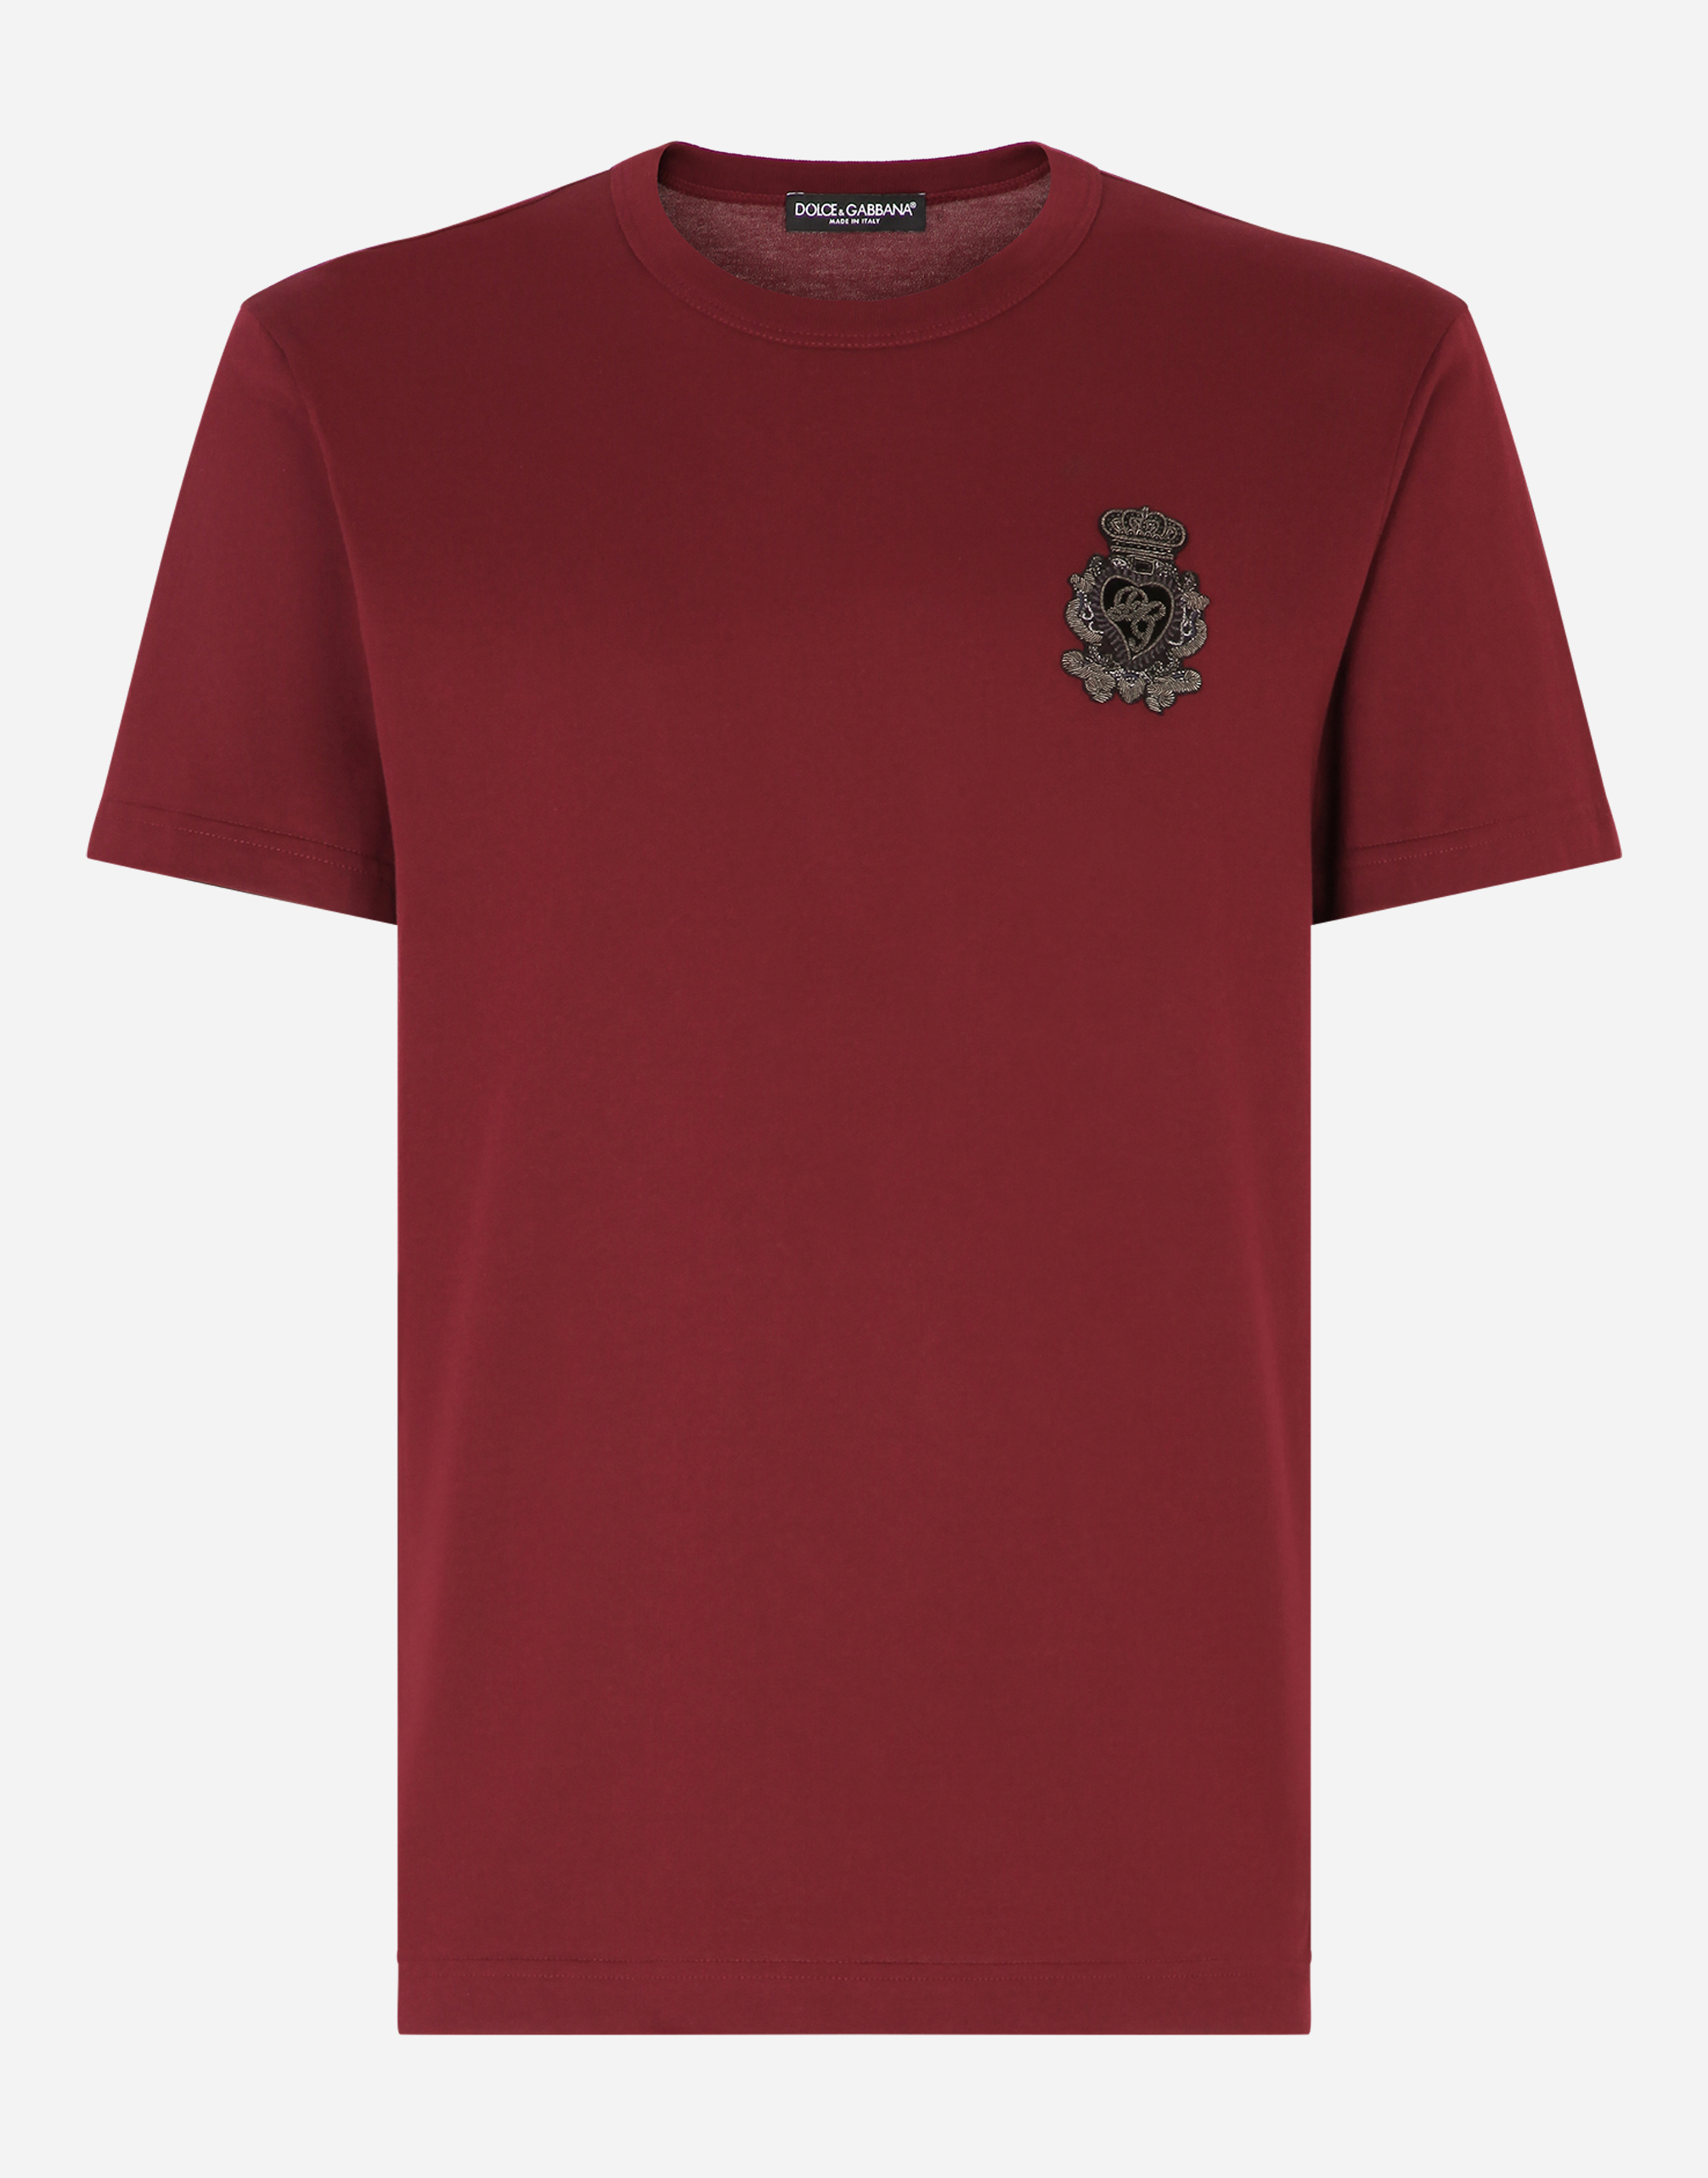 Cotton t-shirt with heraldic patch in Bordeaux